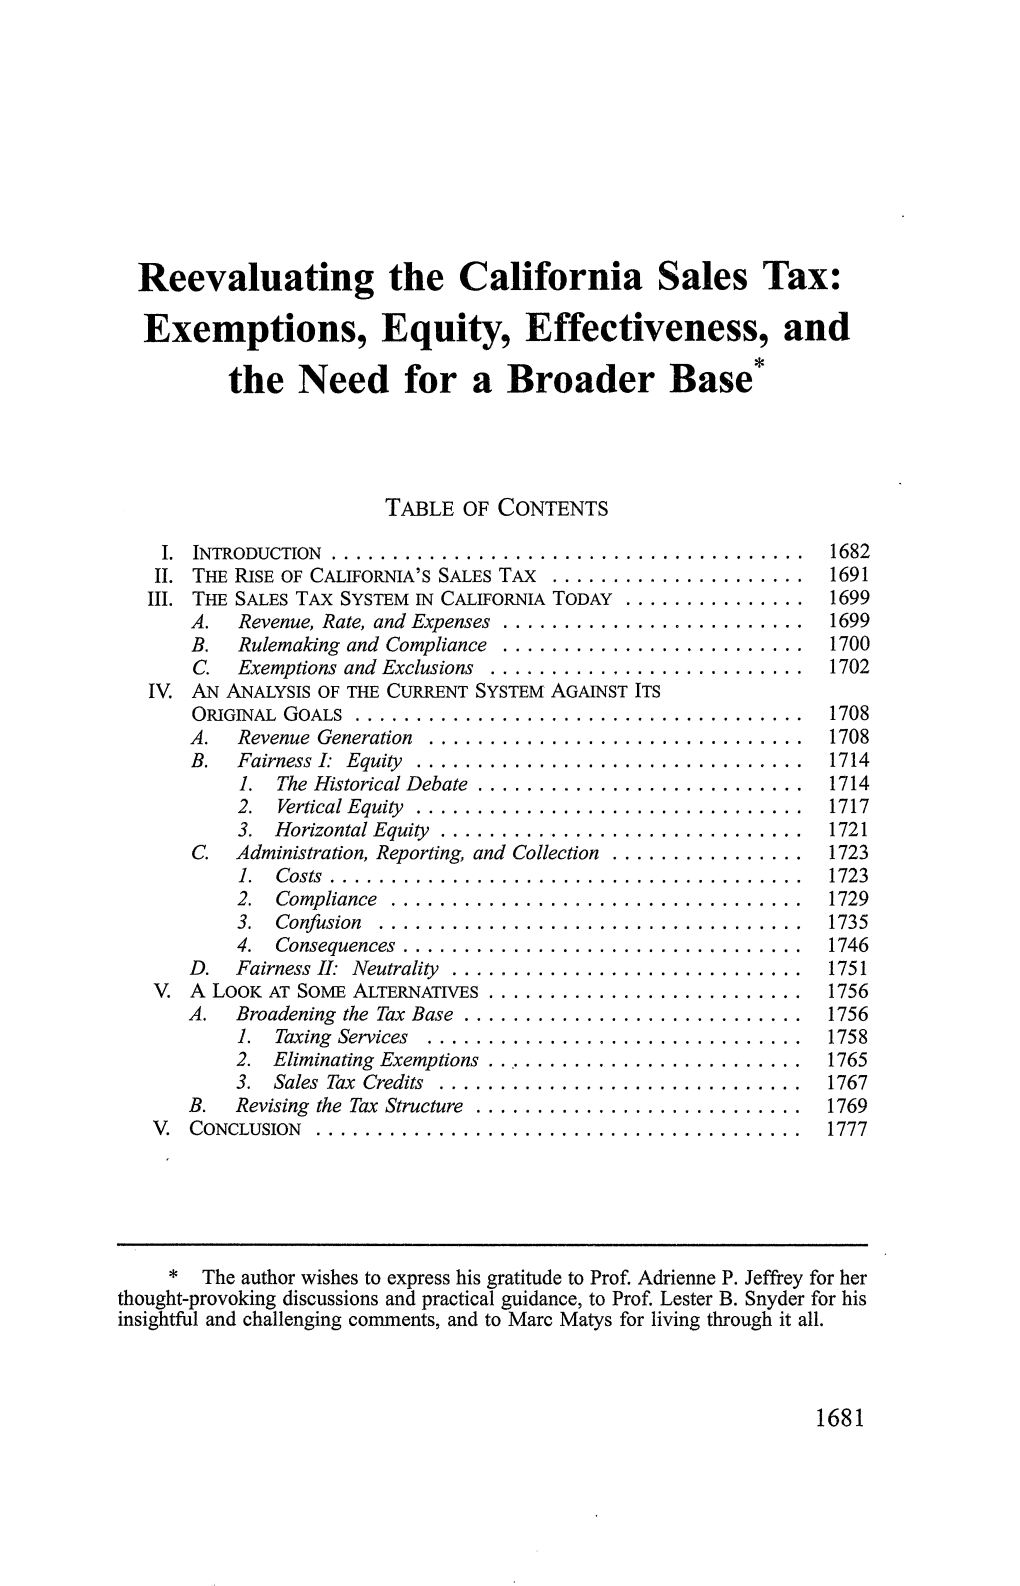 Reevaluating the California Sales Tax: Exemptions, Equity, Effectiveness, and the Need for a Broader Base *